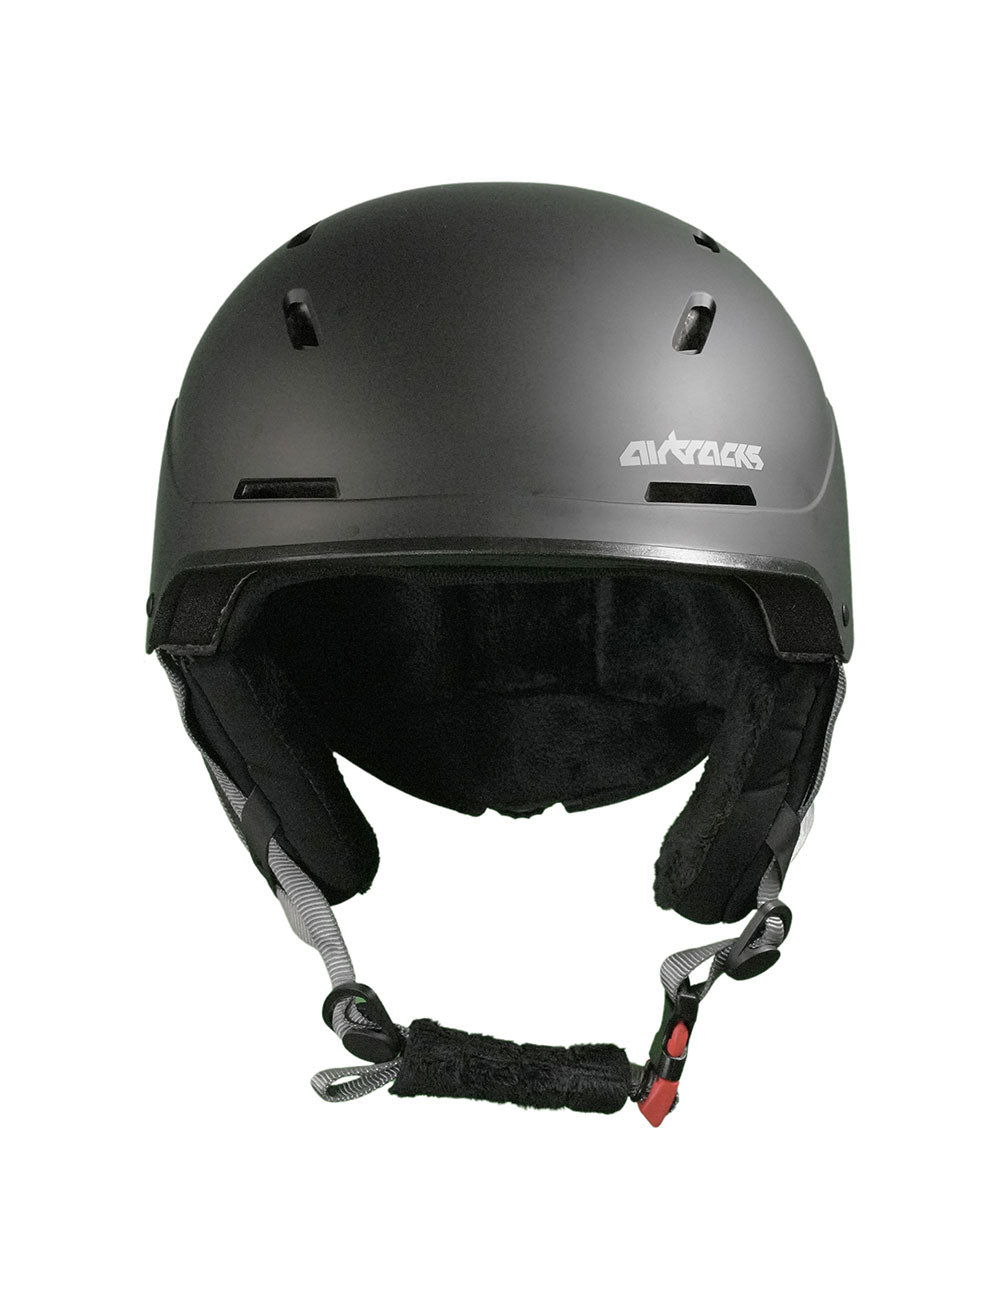 Strong_SB_Helm_sps2101_1300_3